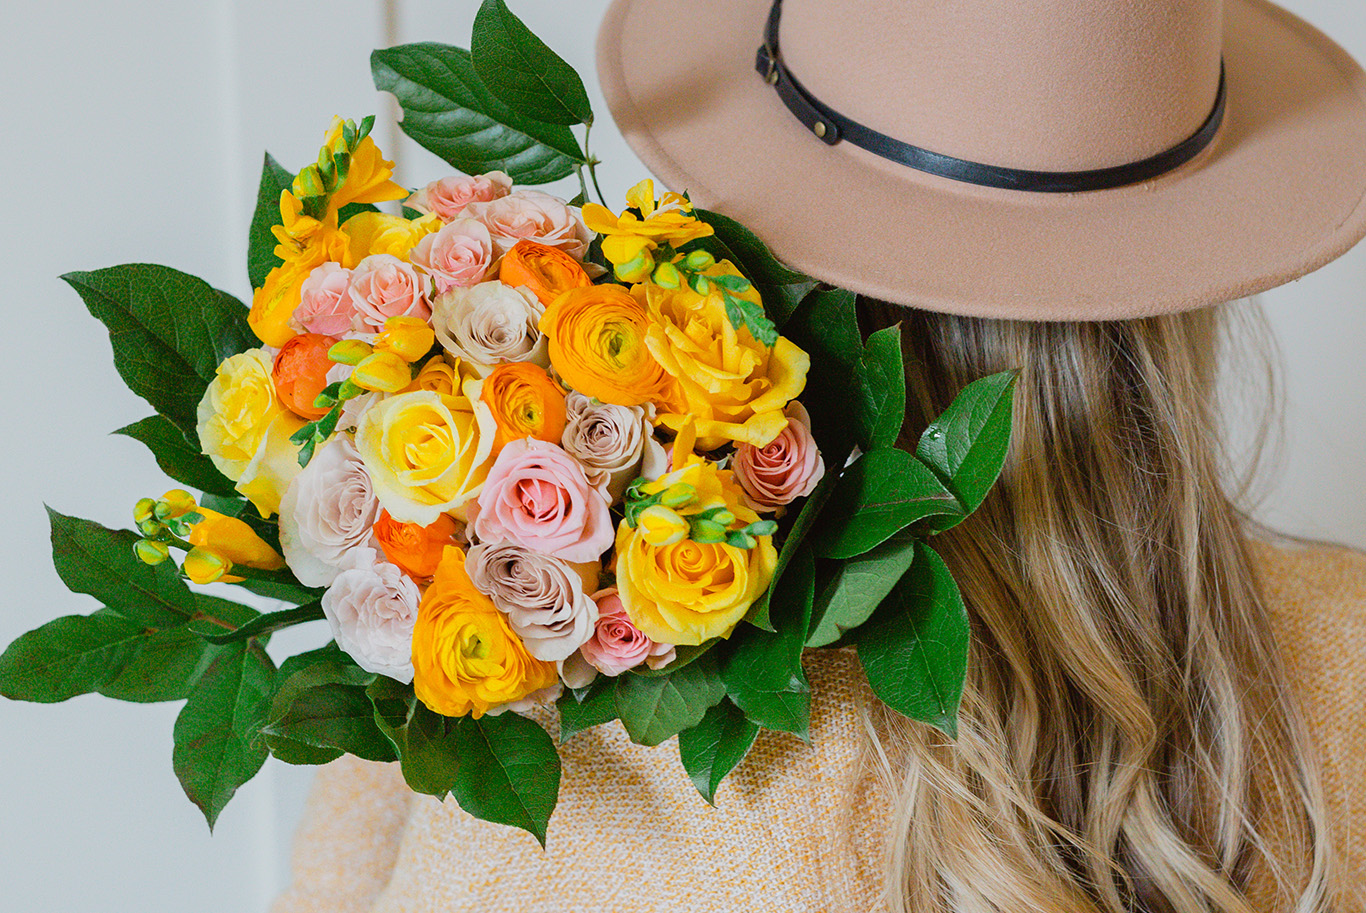 Bouquets inspired by Pantone's Color of the Year